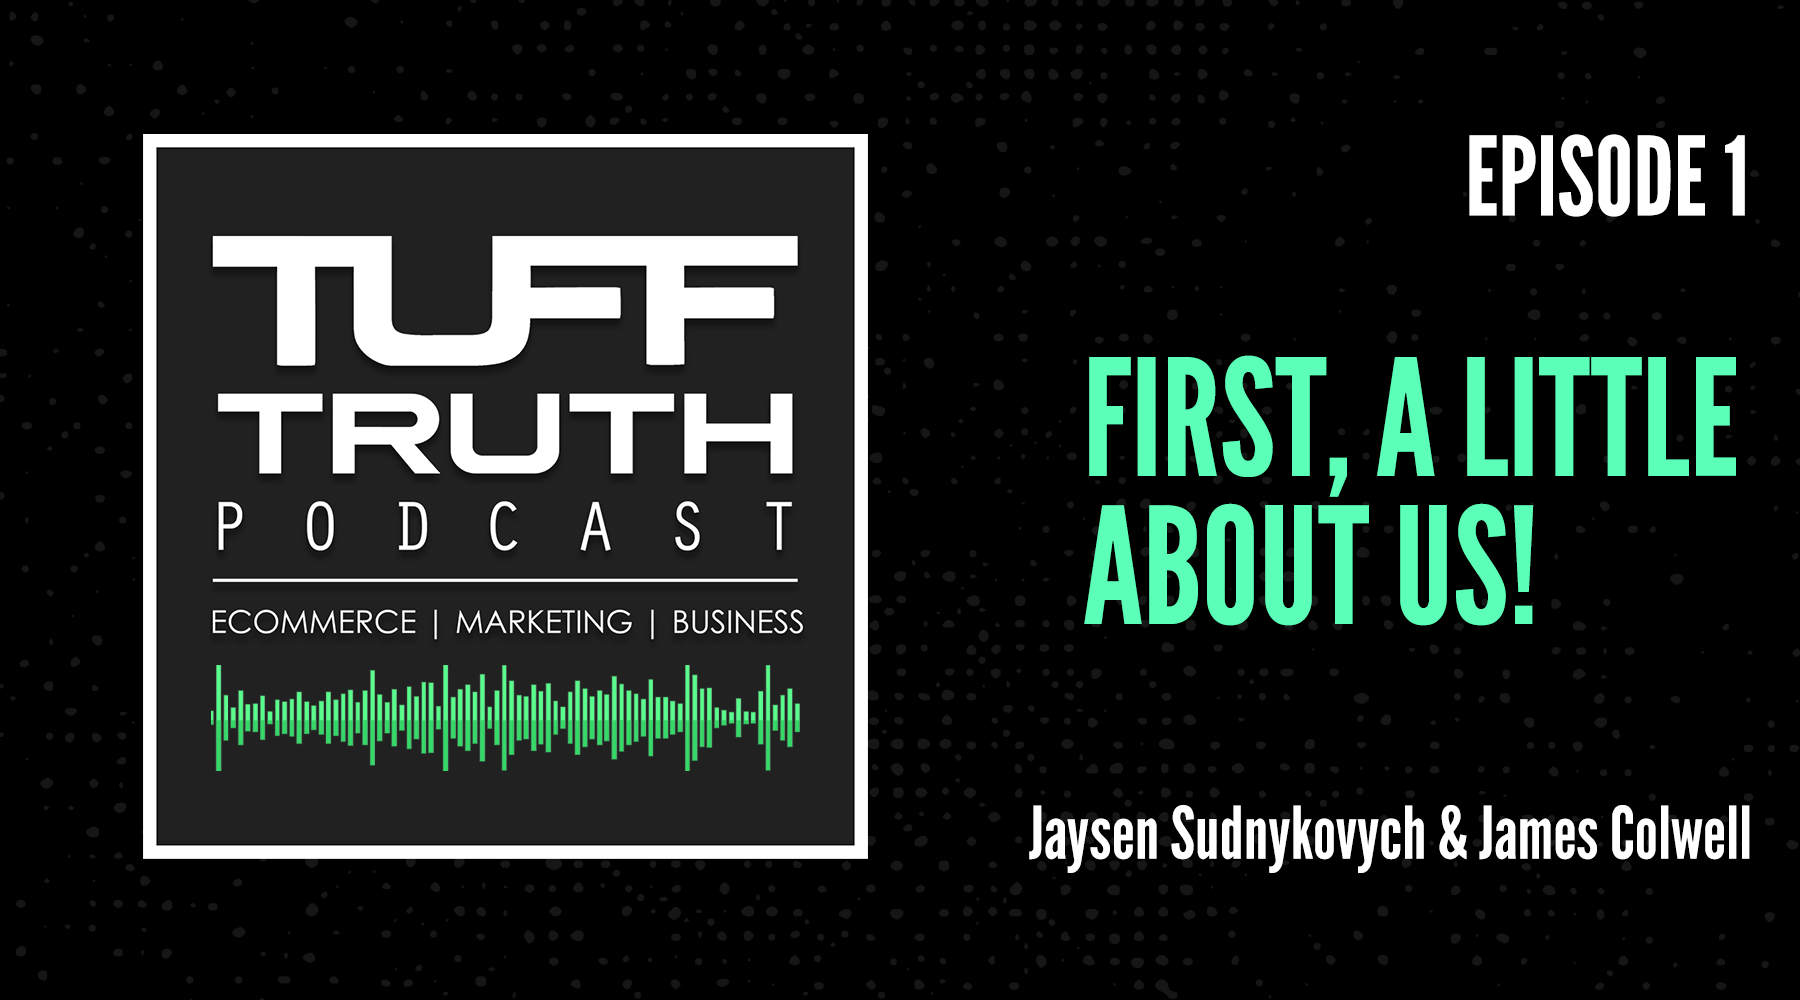 Episode 1: First, a little about us - The TUFF Truth Podcast